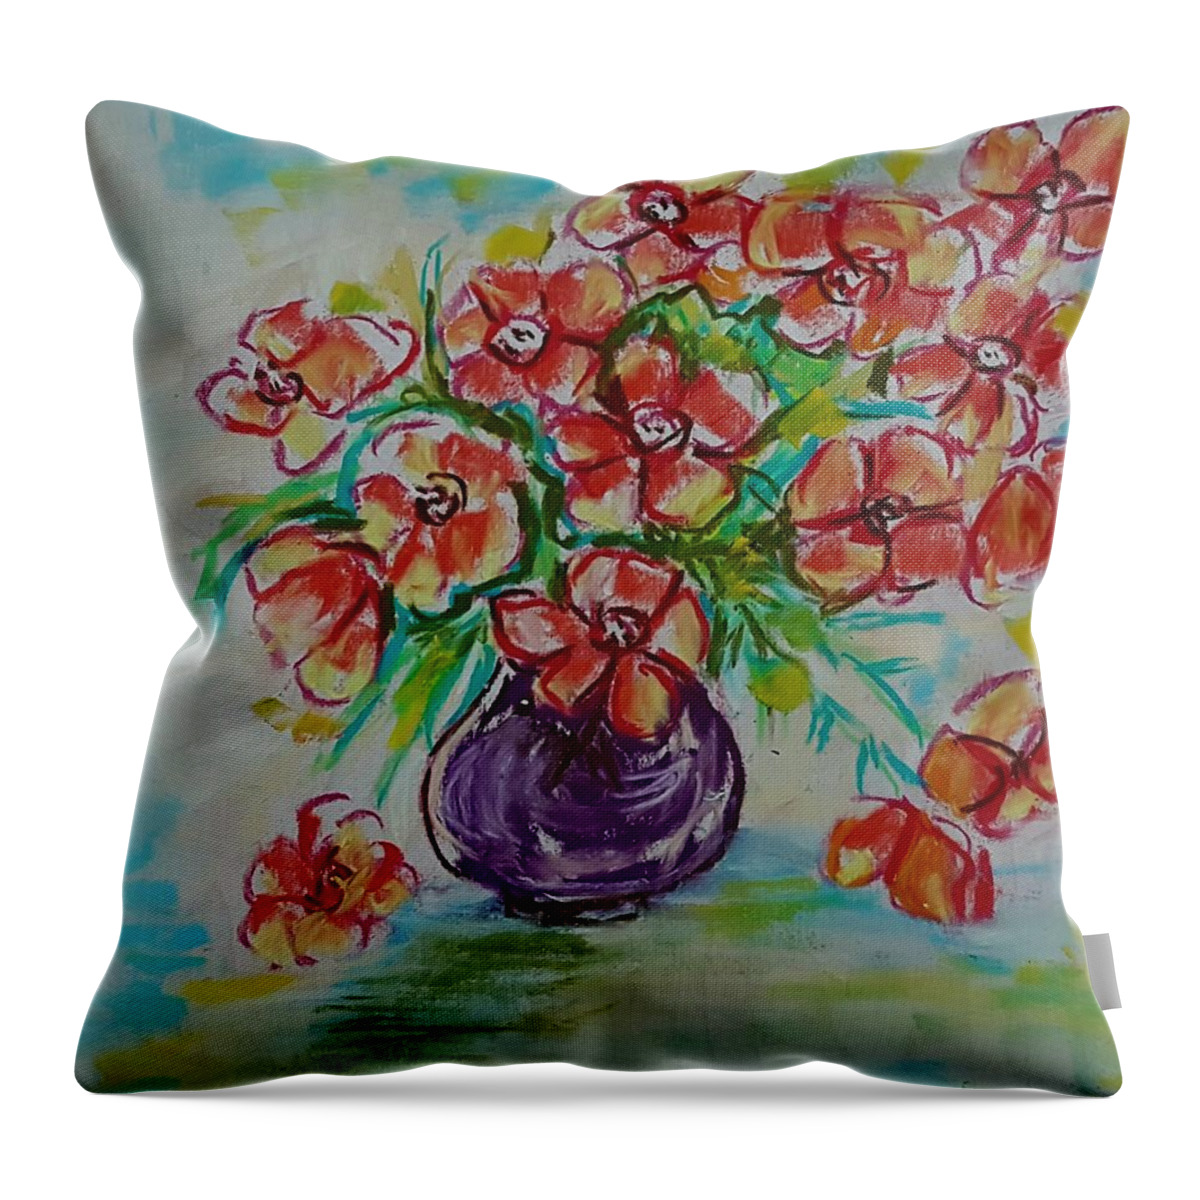 Poppies Throw Pillow featuring the drawing Red poppies in vase by Hae Kim